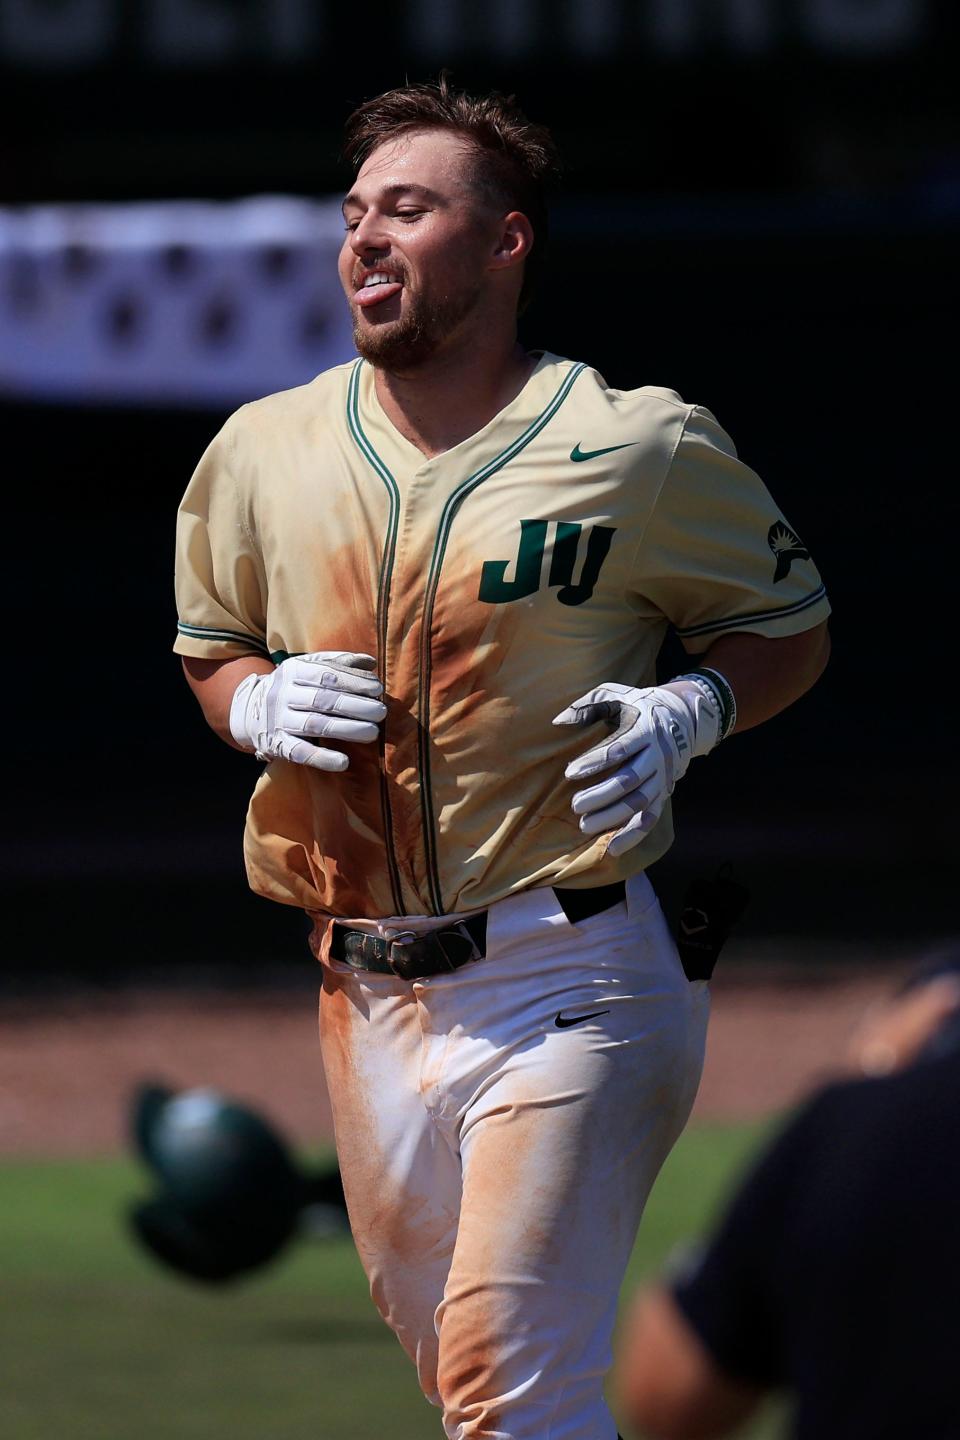 Jacksonville infielder Blake Delamielleure (23) reacts before landing on home plate for his game-winning home run on May 20.